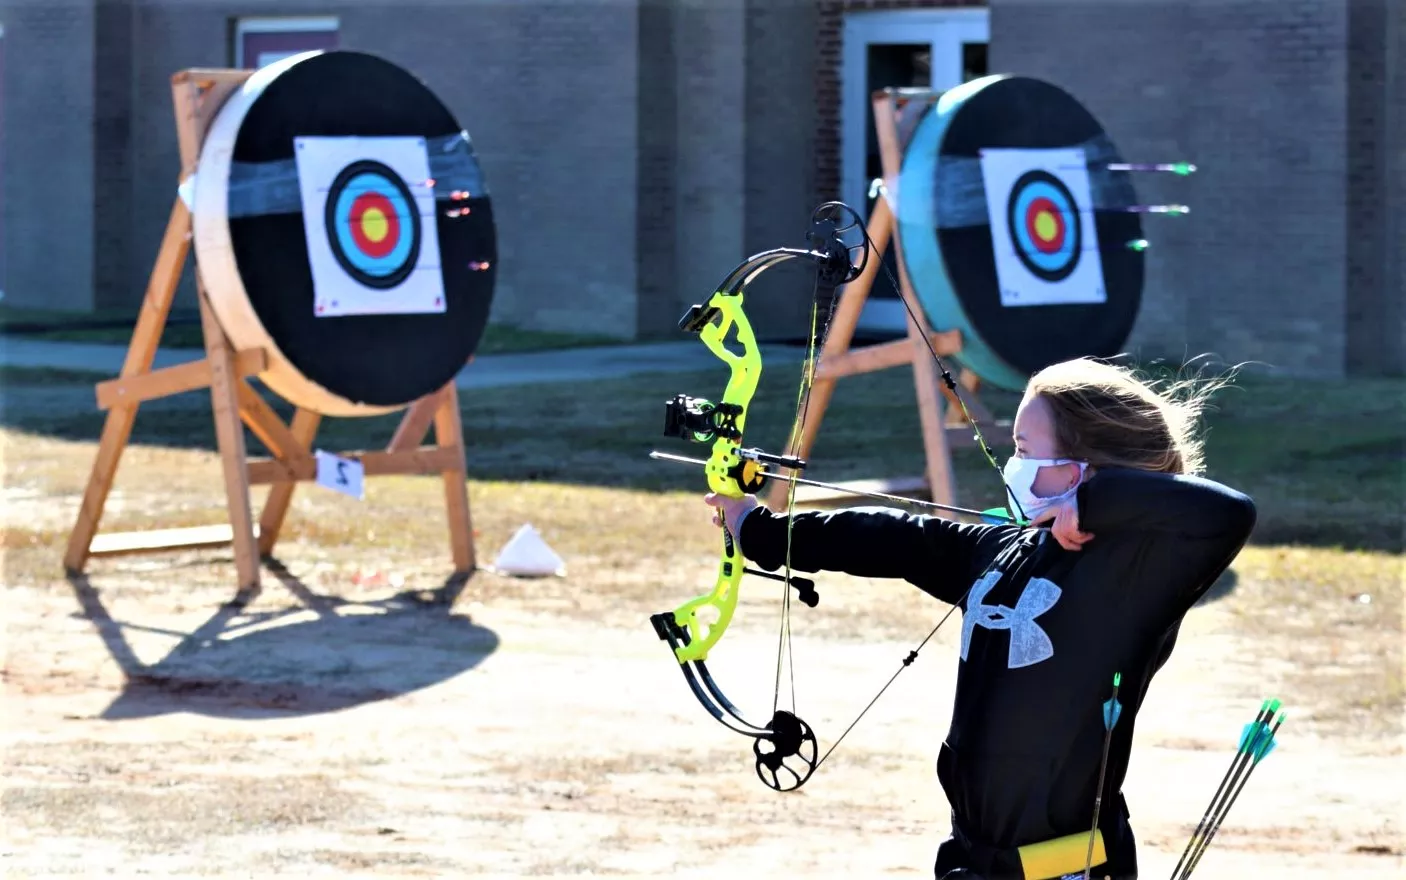 Archery Club Youth Cultural House in Vietnam, East Asia | Archery - Rated 1.1